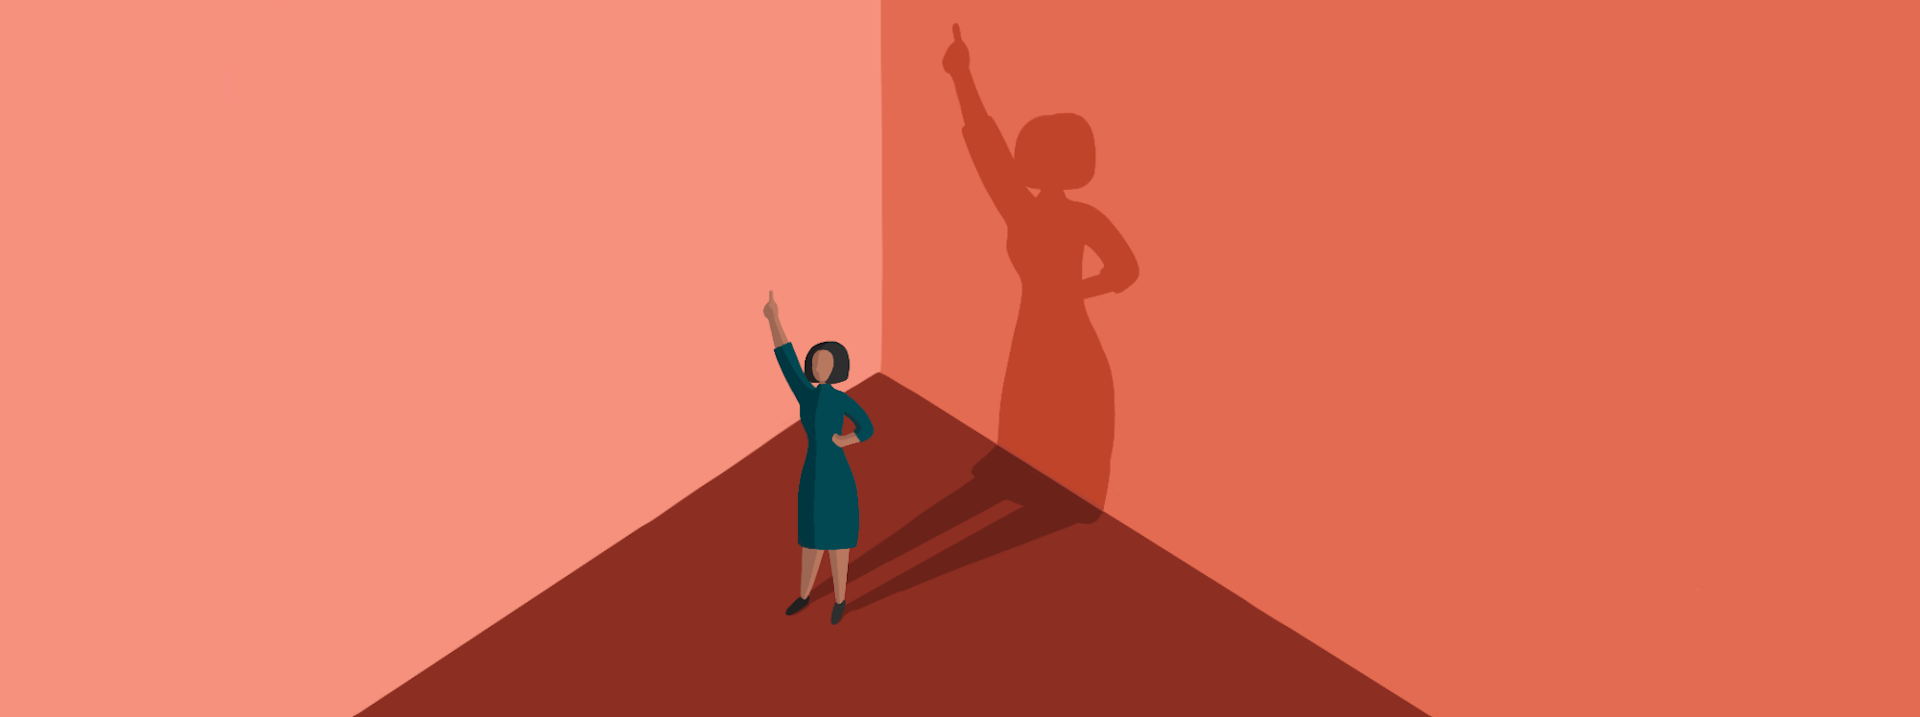 Illustration of a woman in the corner of a room with red walls and a red floor. She has one hand on her hip and one hand pointing into the air. Her shadow is cast on the wall behind her, much larger than her actual size.